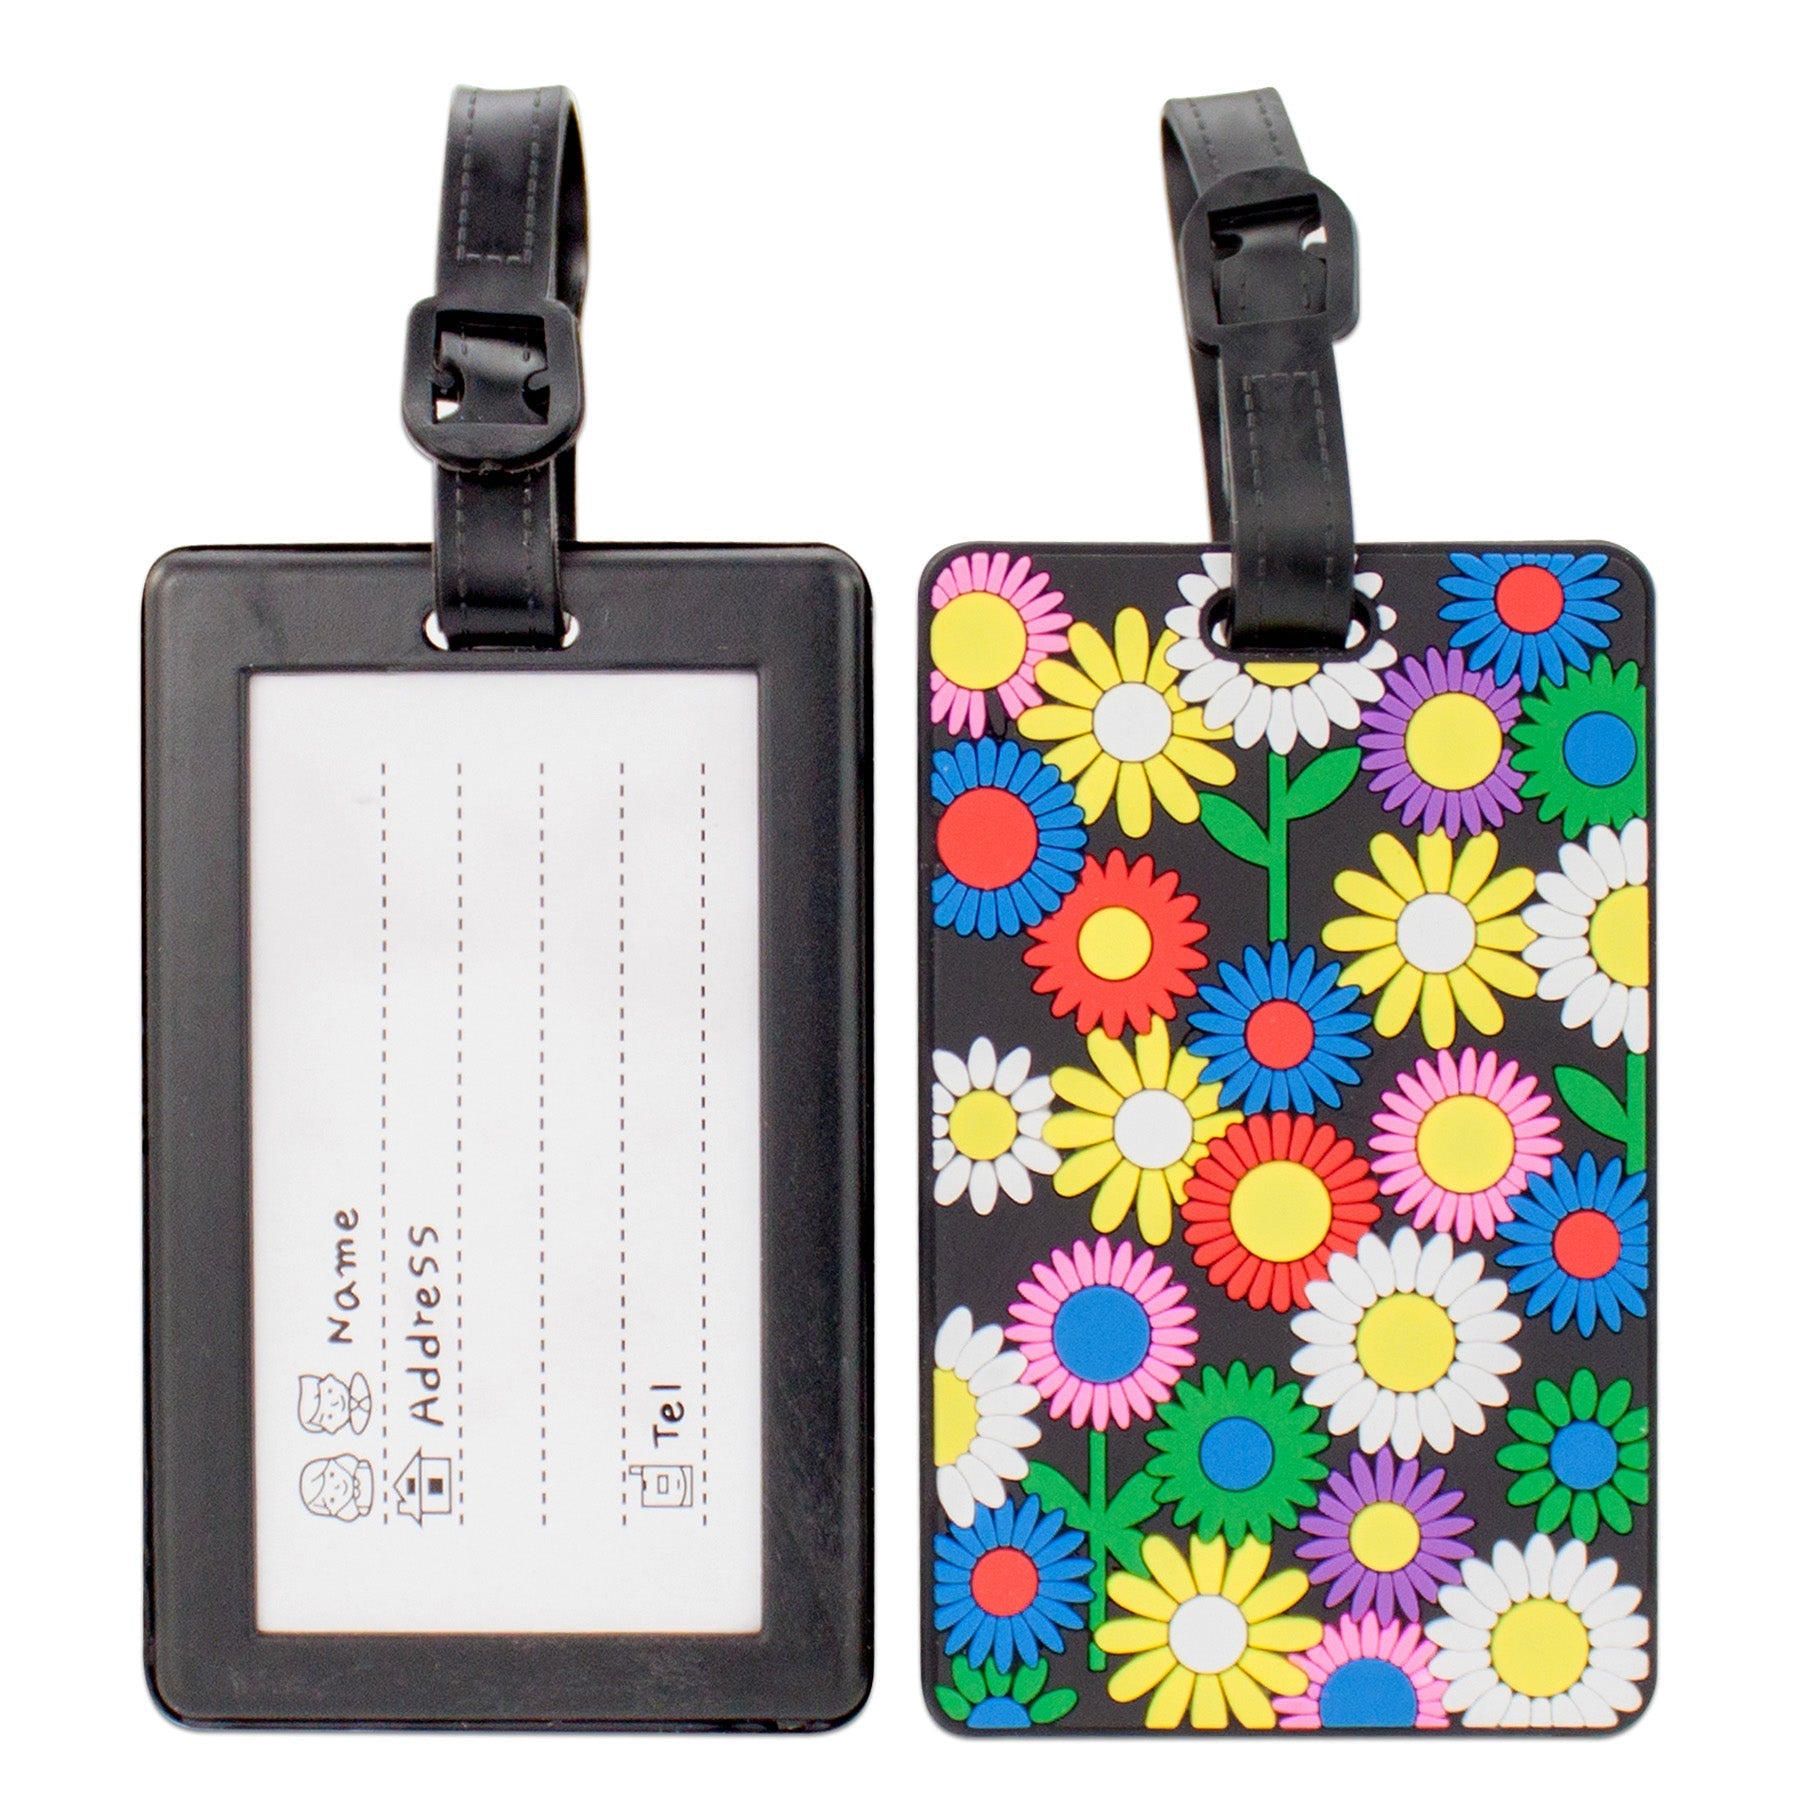 Colorful Collection Luggage Tags Set of 2